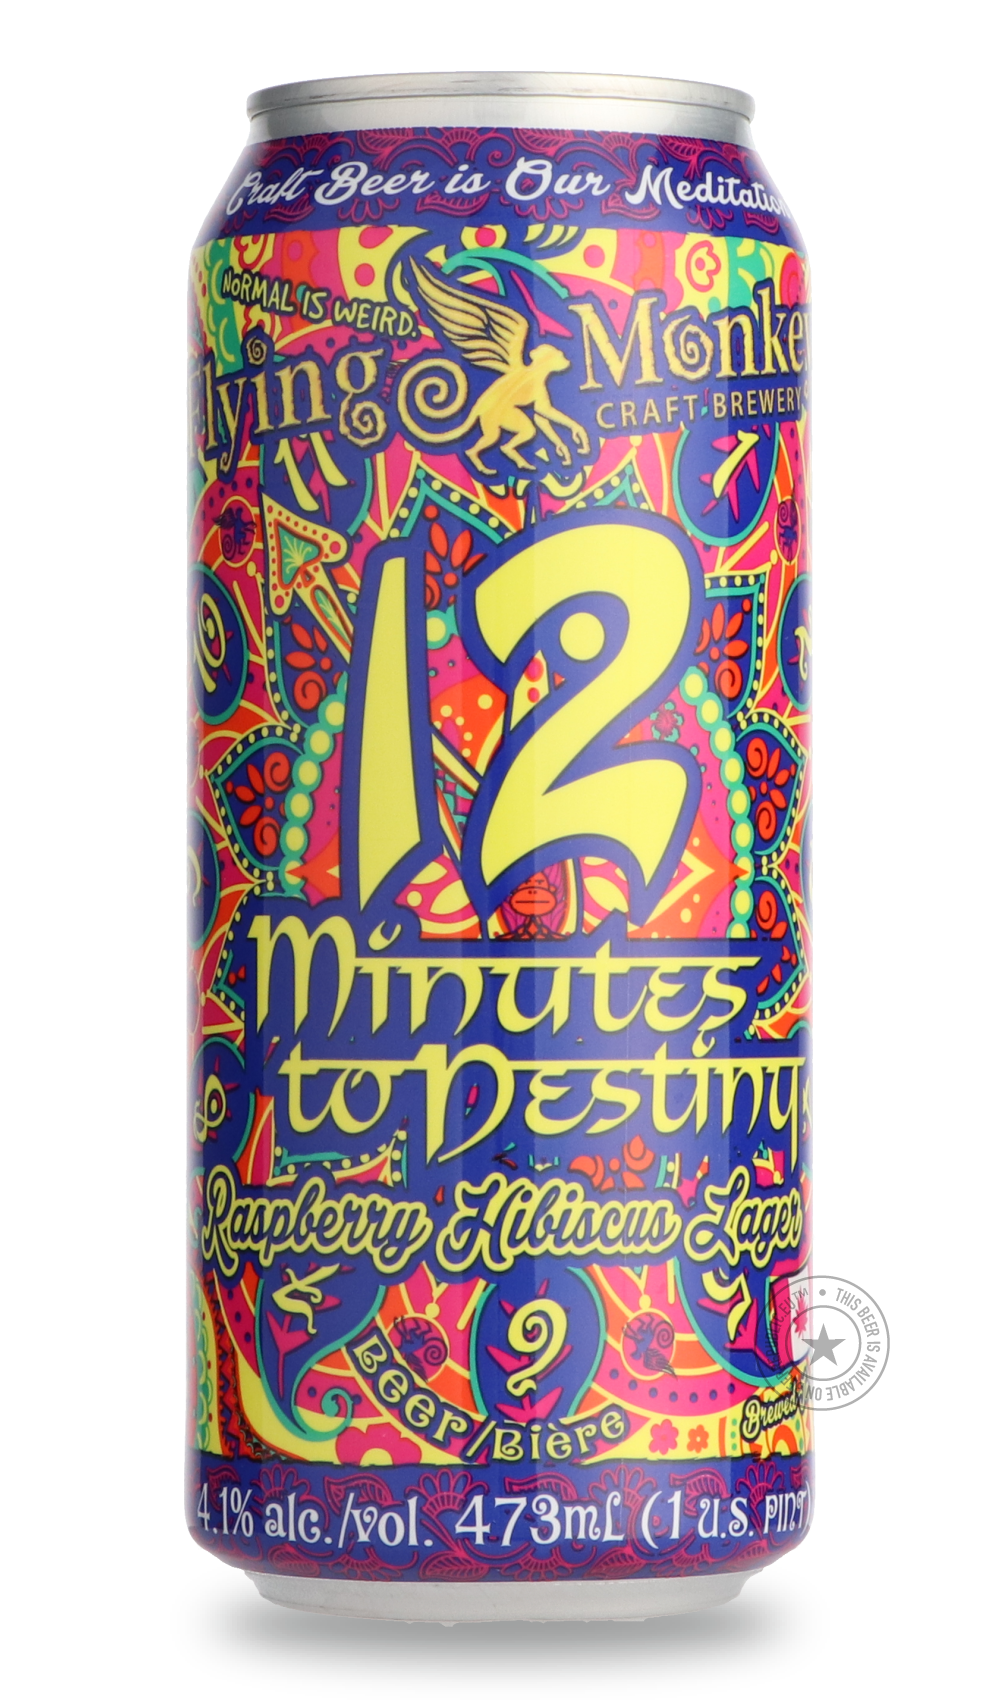 -Flying Monkeys- 12 Minutes to Destiny-Sour / Wild & Fruity- Only @ Beer Republic - The best online beer store for American & Canadian craft beer - Buy beer online from the USA and Canada - Bier online kopen - Amerikaans bier kopen - Craft beer store - Craft beer kopen - Amerikanisch bier kaufen - Bier online kaufen - Acheter biere online - IPA - Stout - Porter - New England IPA - Hazy IPA - Imperial Stout - Barrel Aged - Barrel Aged Imperial Stout - Brown - Dark beer - Blond - Blonde - Pilsner - Lager - Wh